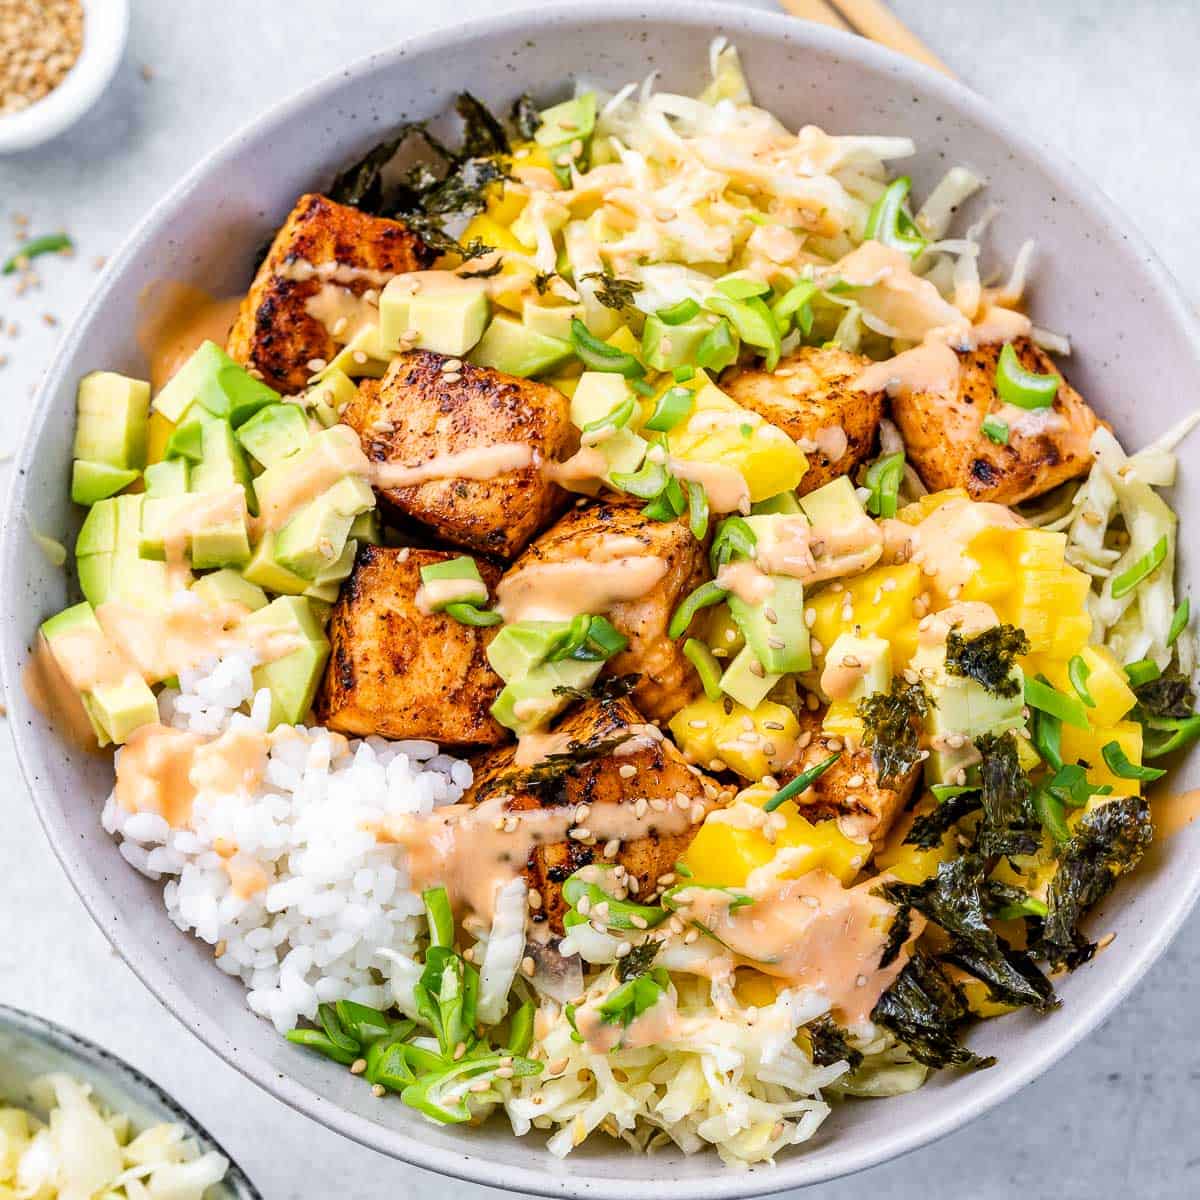 Top view bowl with spicy salmon bites, rice, sauce, avocado, and mango.